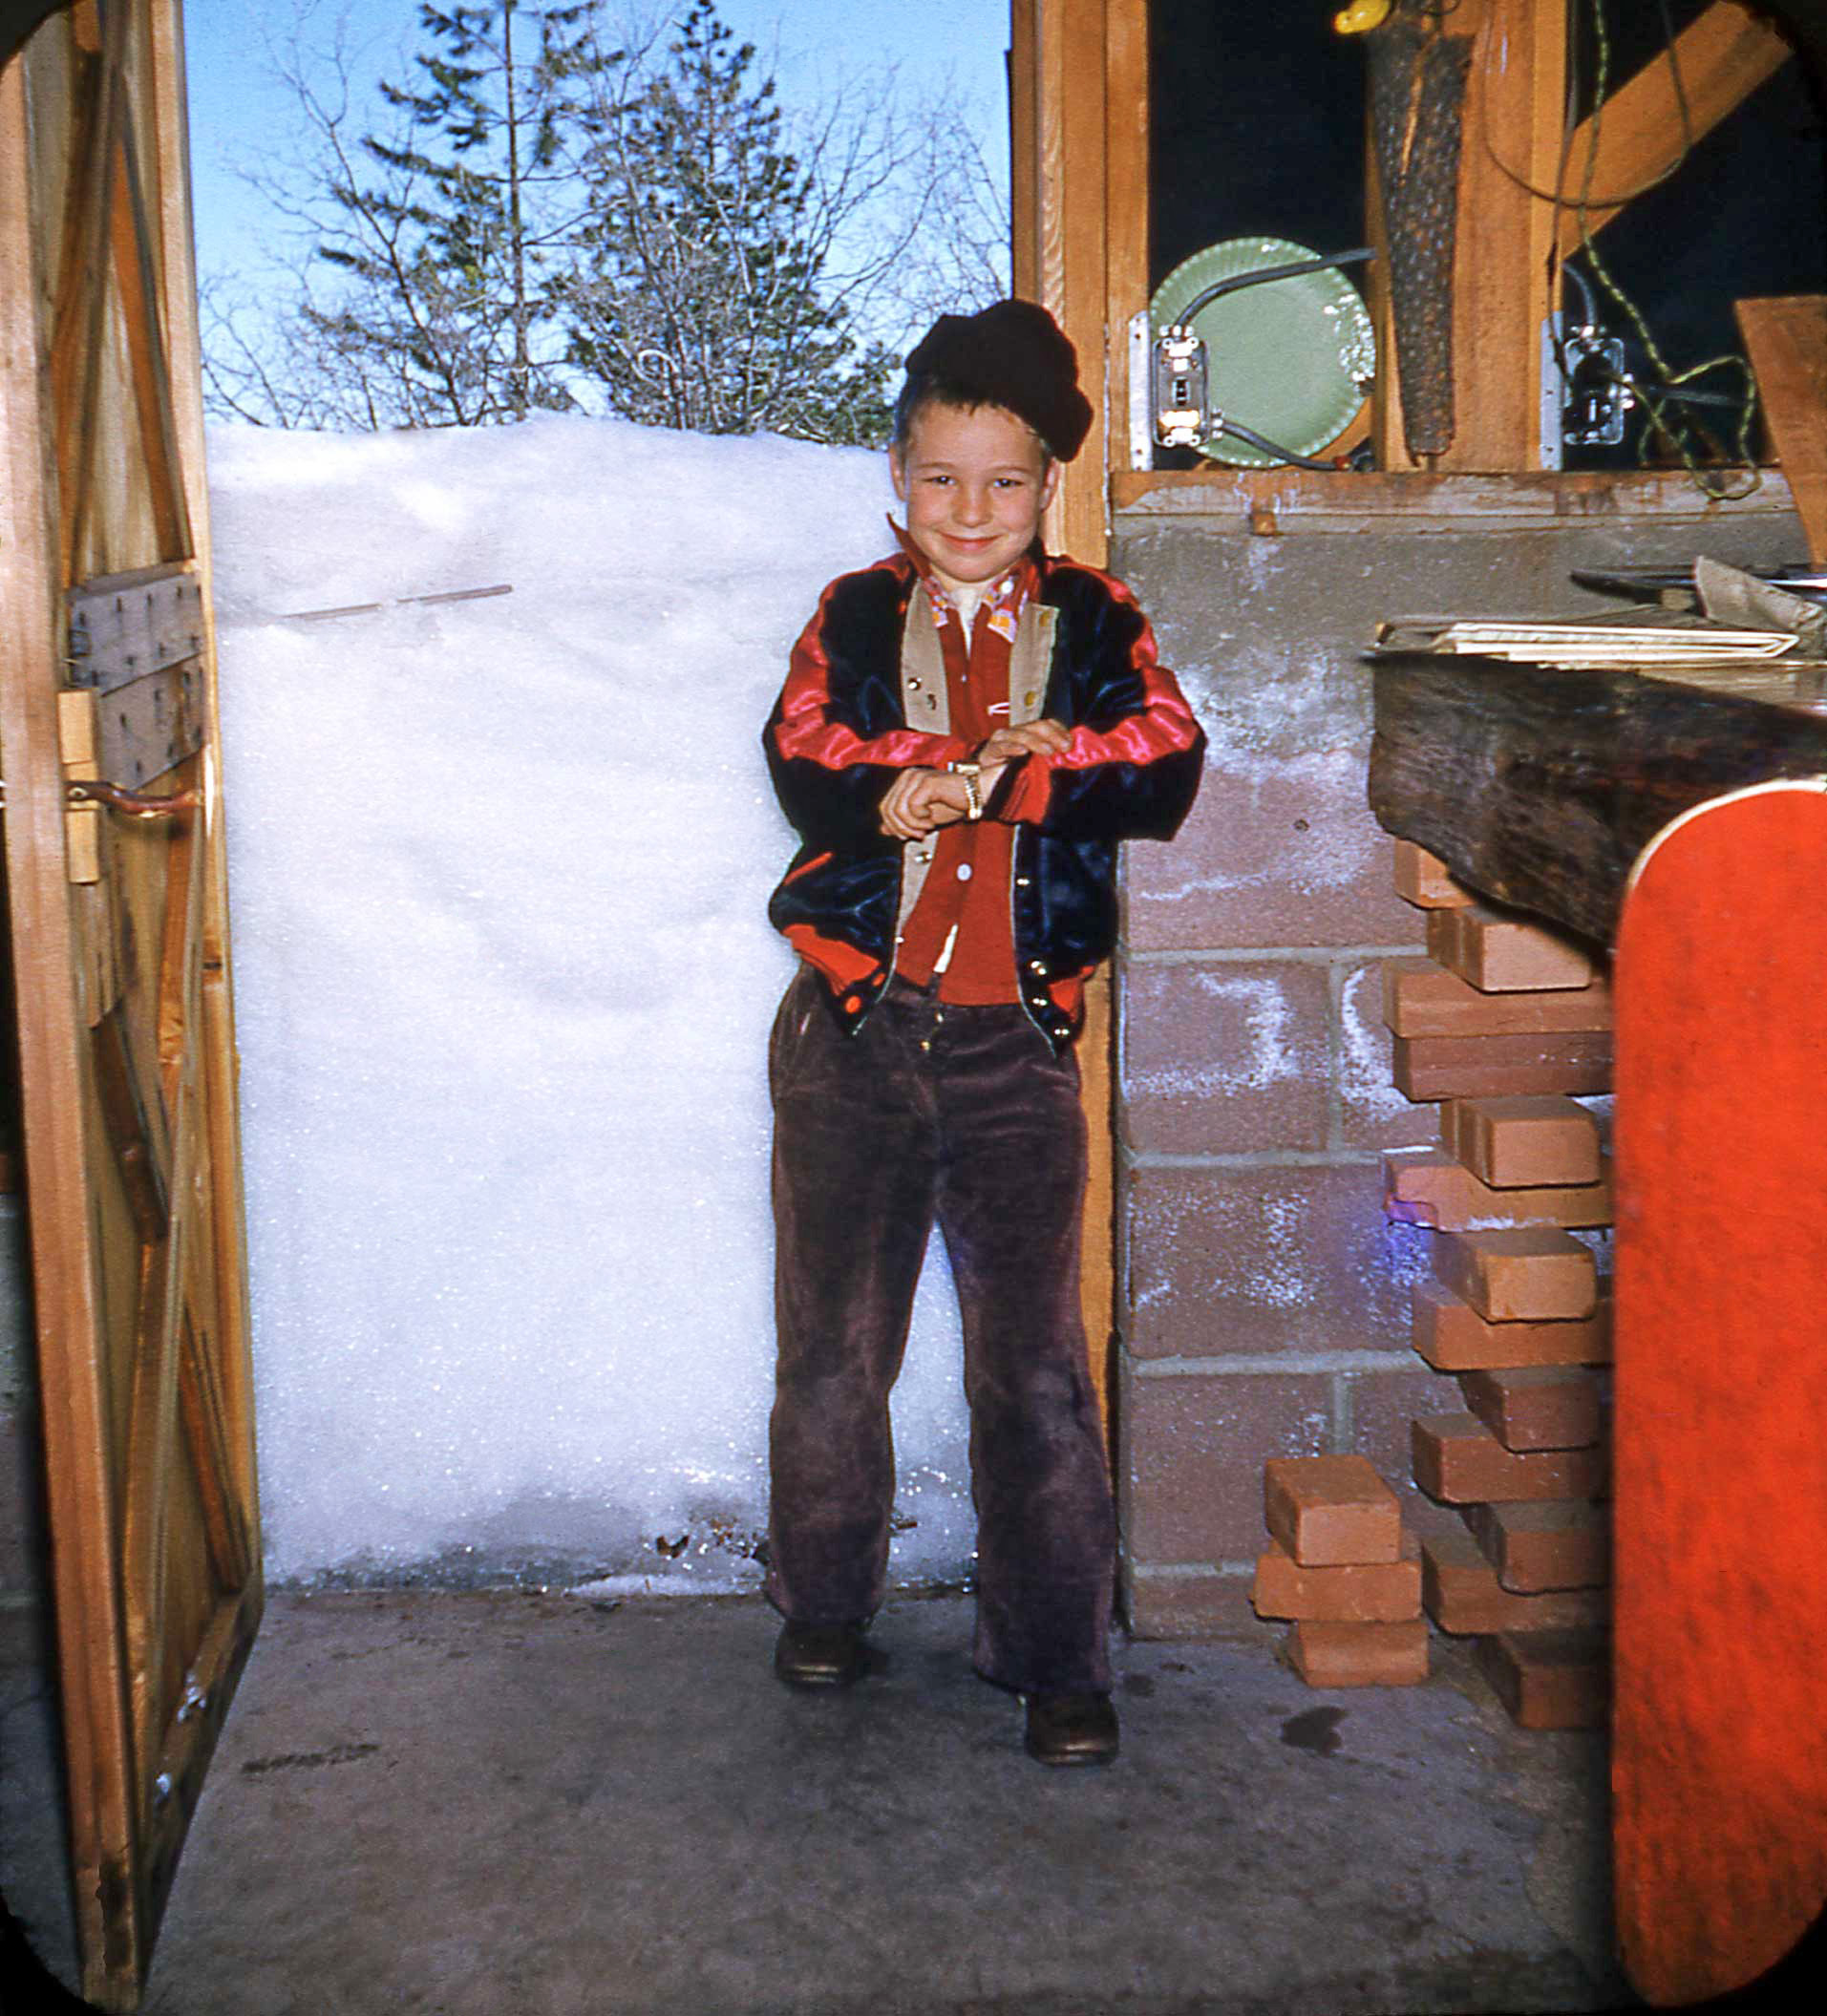 This is Rauleigh, previously seen in the colorful kitchen. He's almost 10 (Edit: I made a mistake, he is about 8 in these 1951 photos) in this Kodachrome taken at the "south porch" door of a cabin in Running Springs, California in 1951. From a set found in a thrift store. View full size.